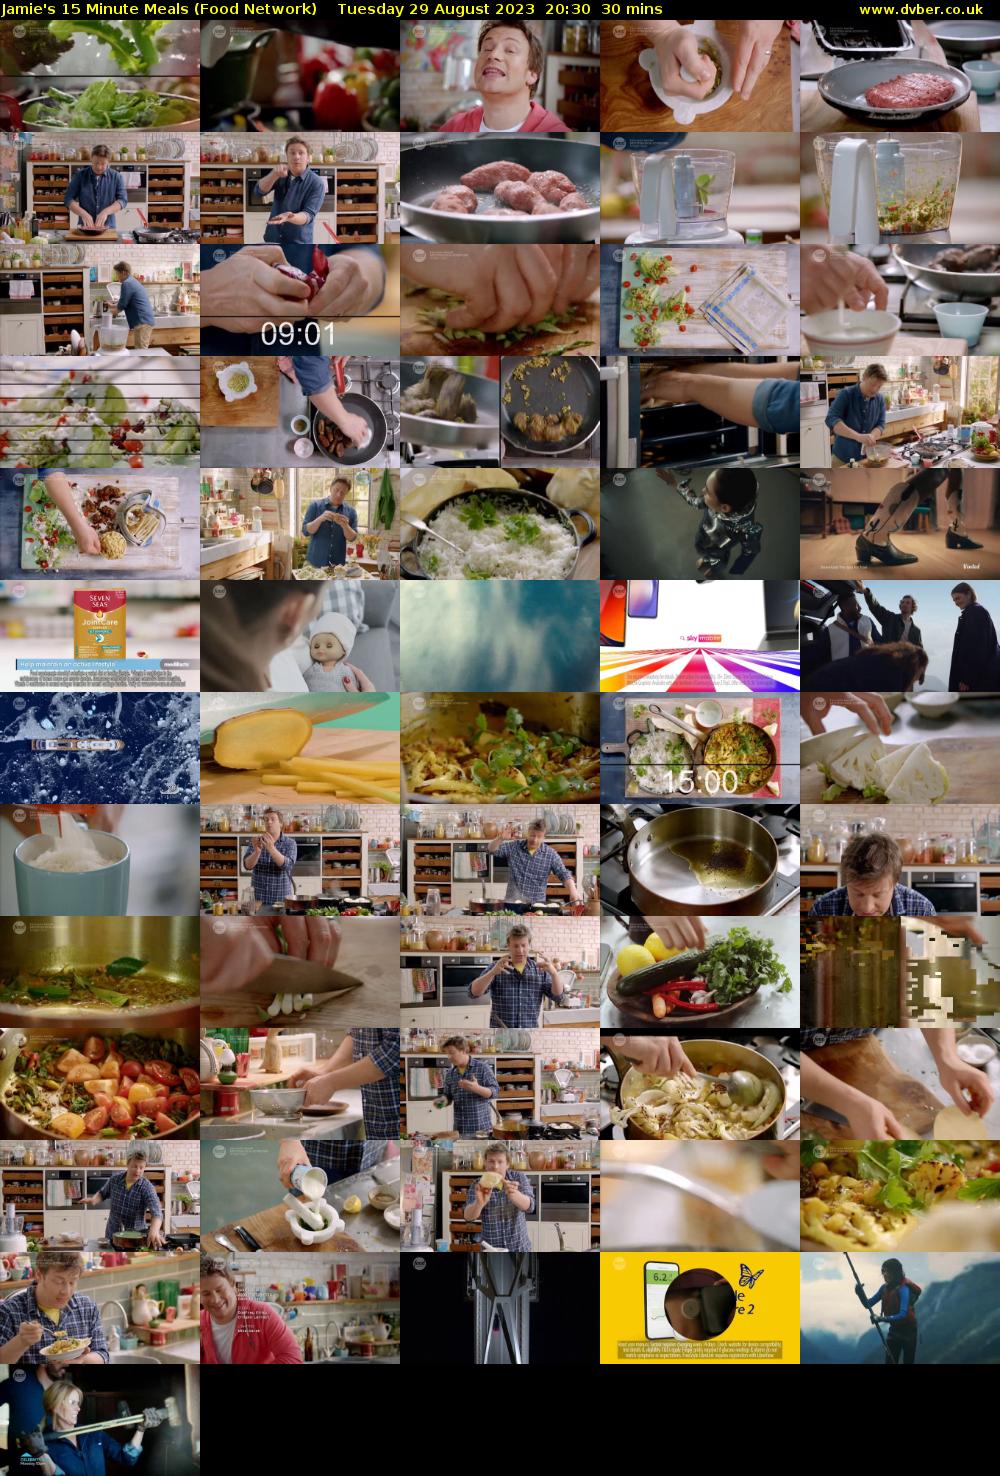 Jamie's 15 Minute Meals (Food Network) Tuesday 29 August 2023 20:30 - 21:00